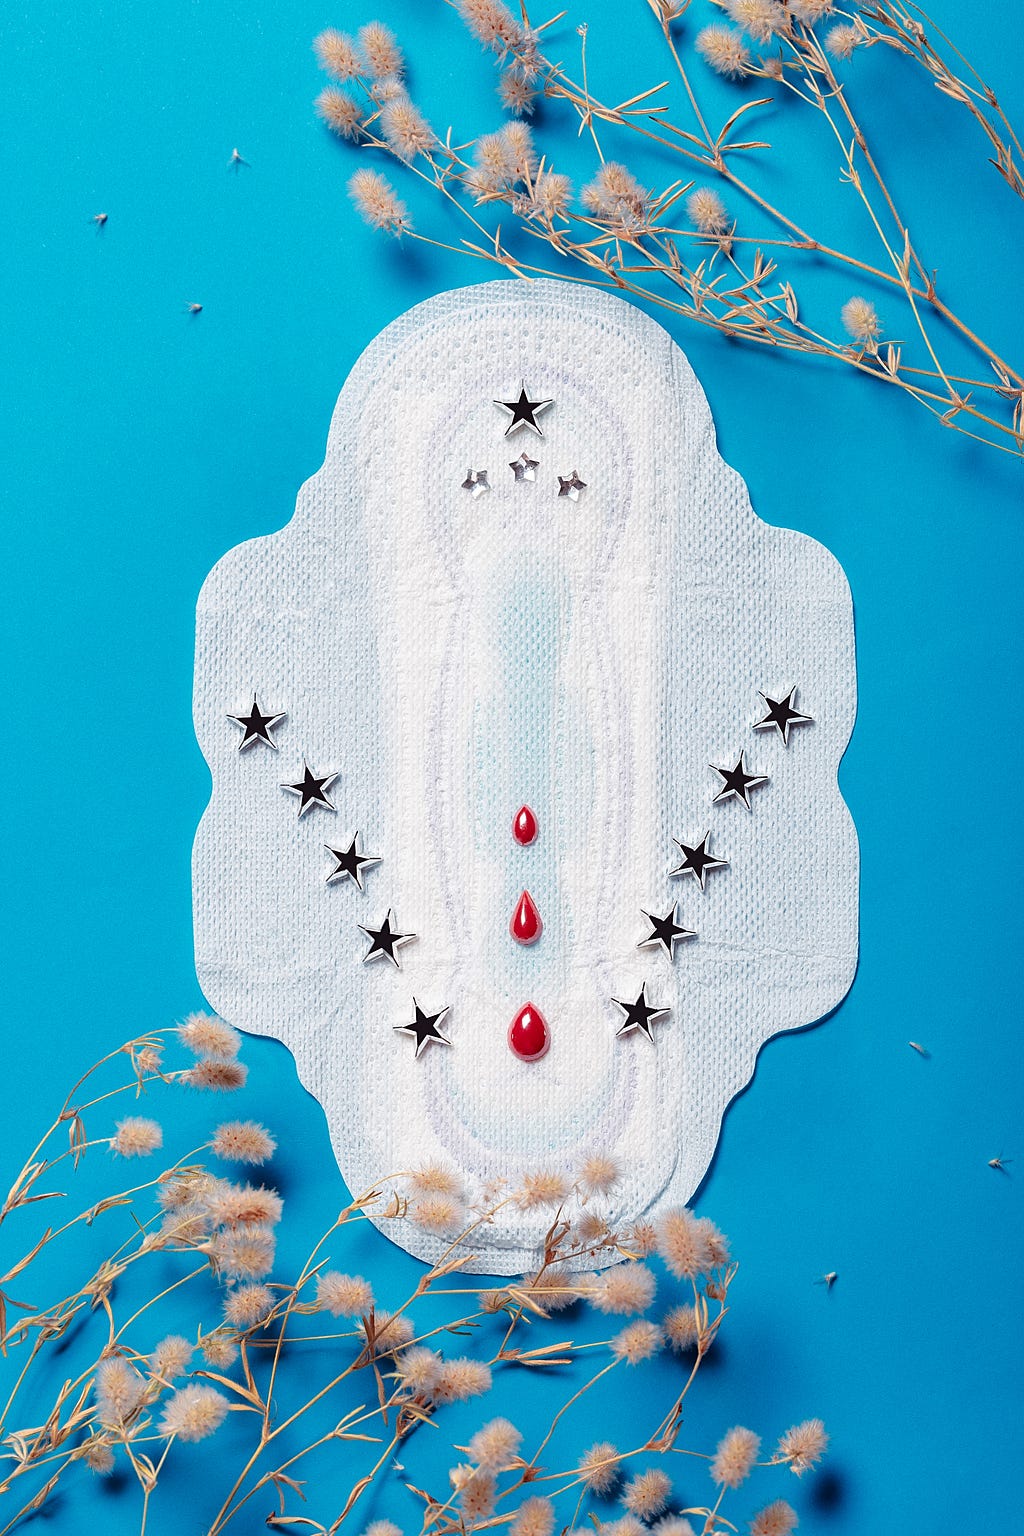 A sanitary pad with two rows of stars aligned opposite one another